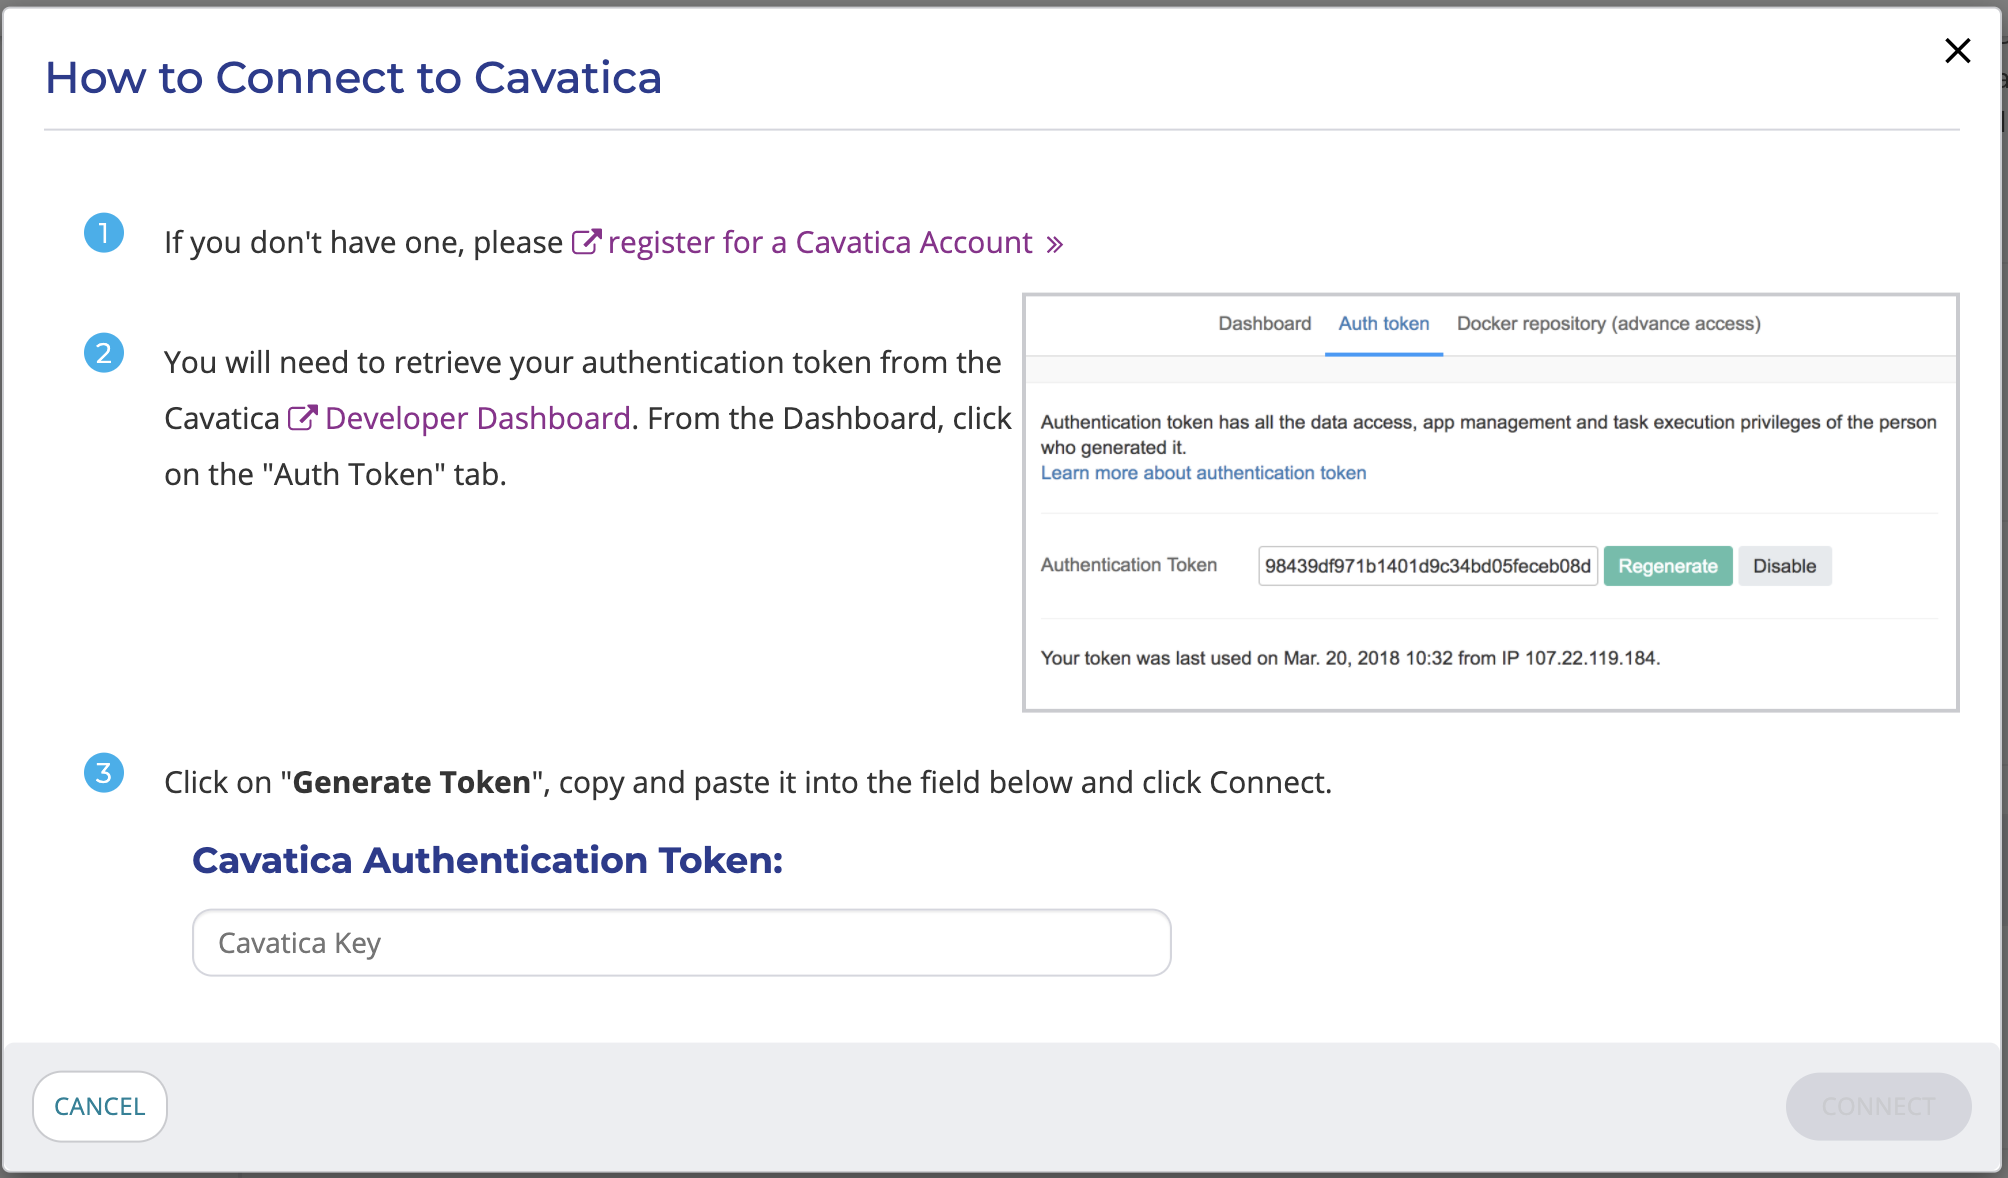 How to Connect to Cavatica